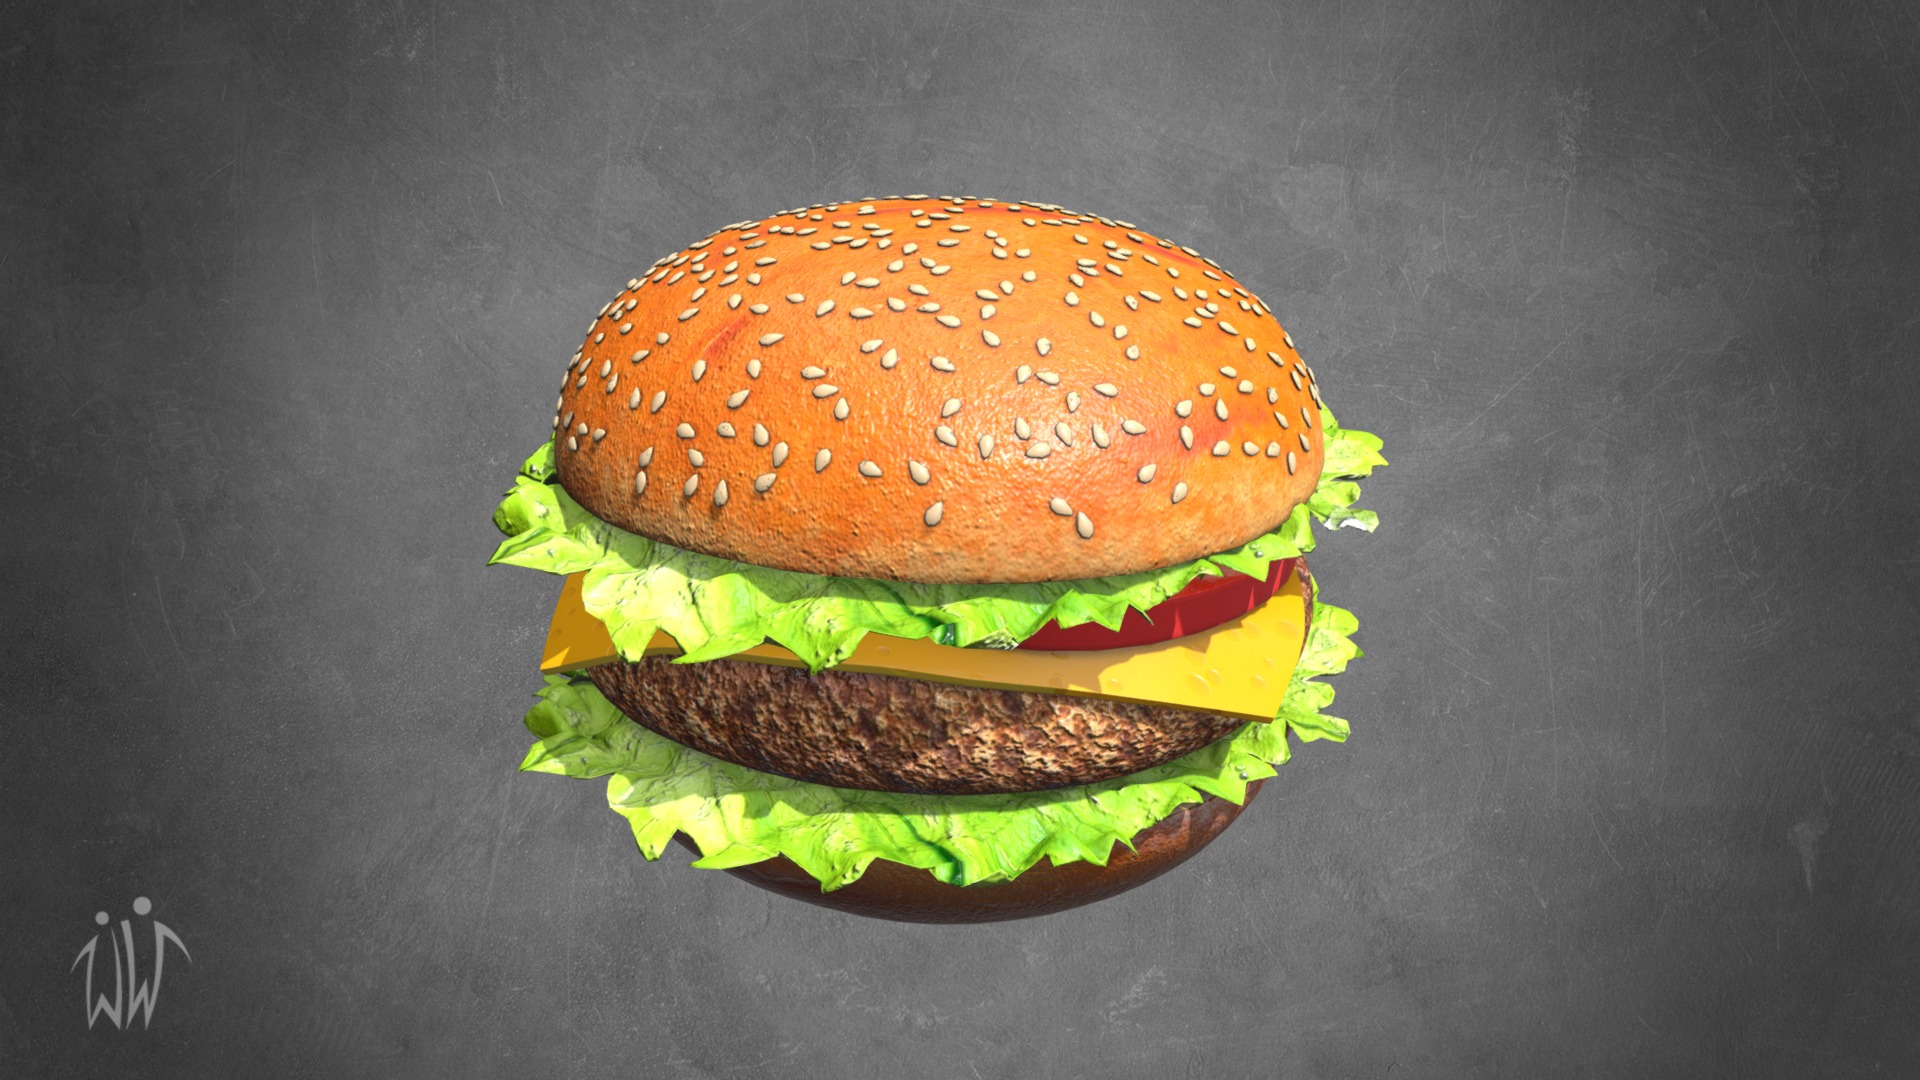 3D model Hamburger with Cutlet and Vegetables - This is a 3D model of the Hamburger with Cutlet and Vegetables. The 3D model is about a hamburger with lettuce and tomato.